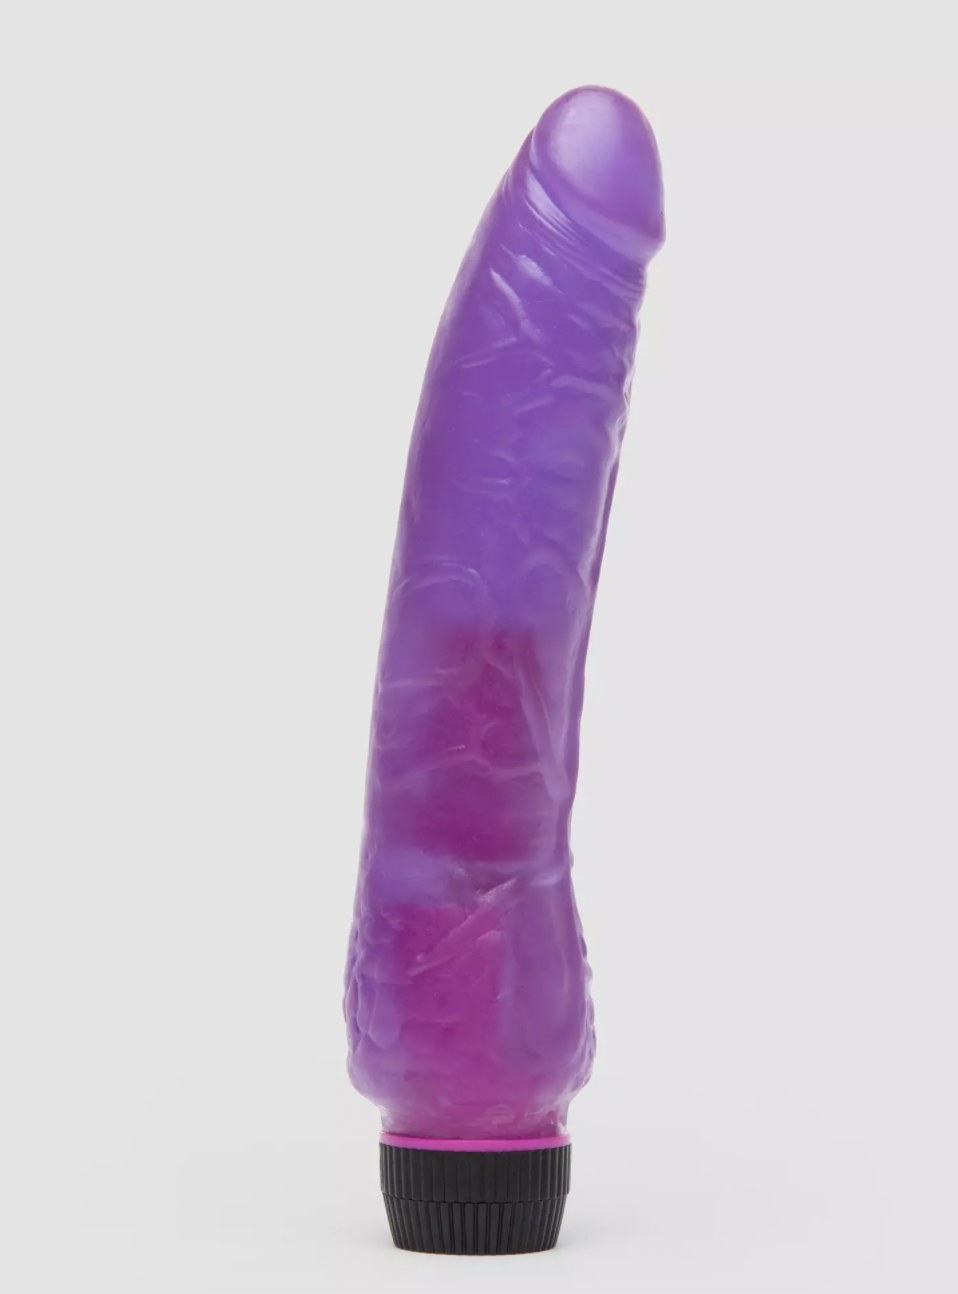 The purple vibrating soft-textured dildo with a twist control at the base